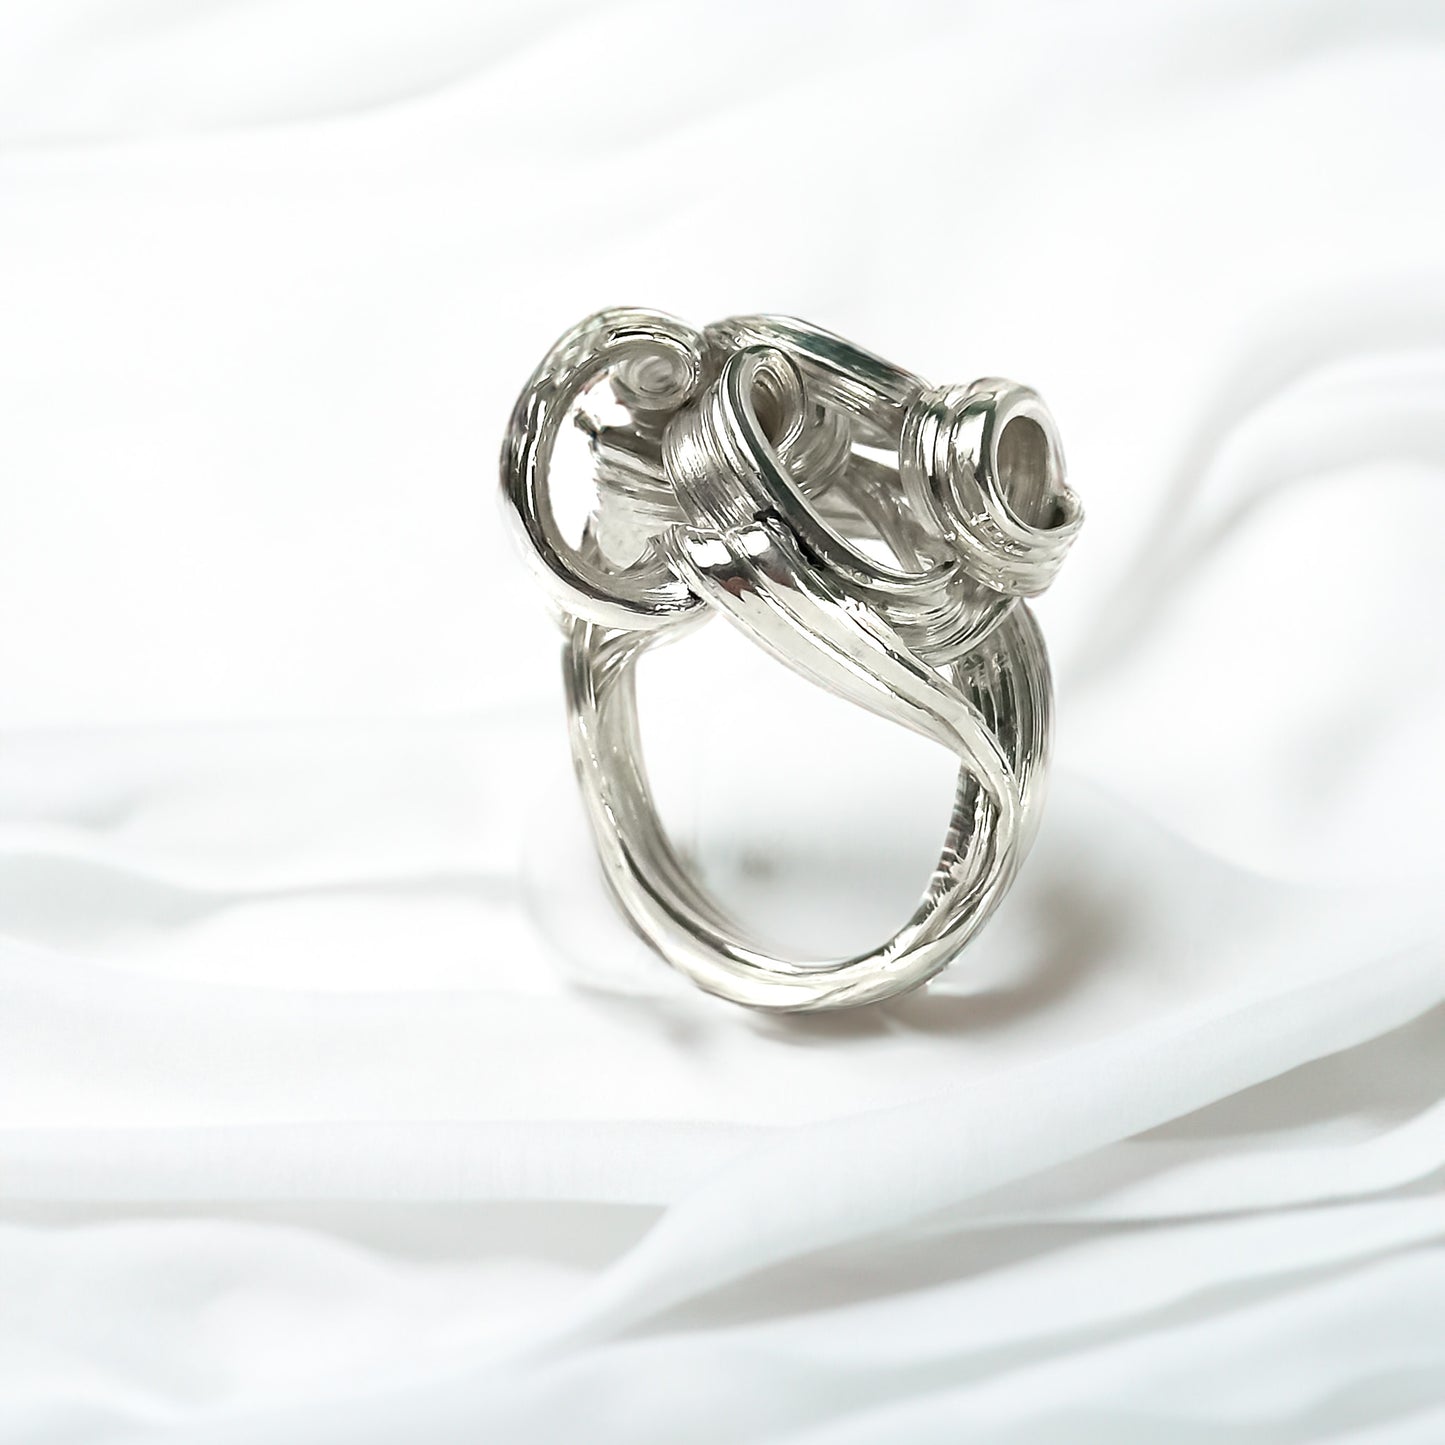 One of a kind Drift Sterling Silver Ring - Size Q